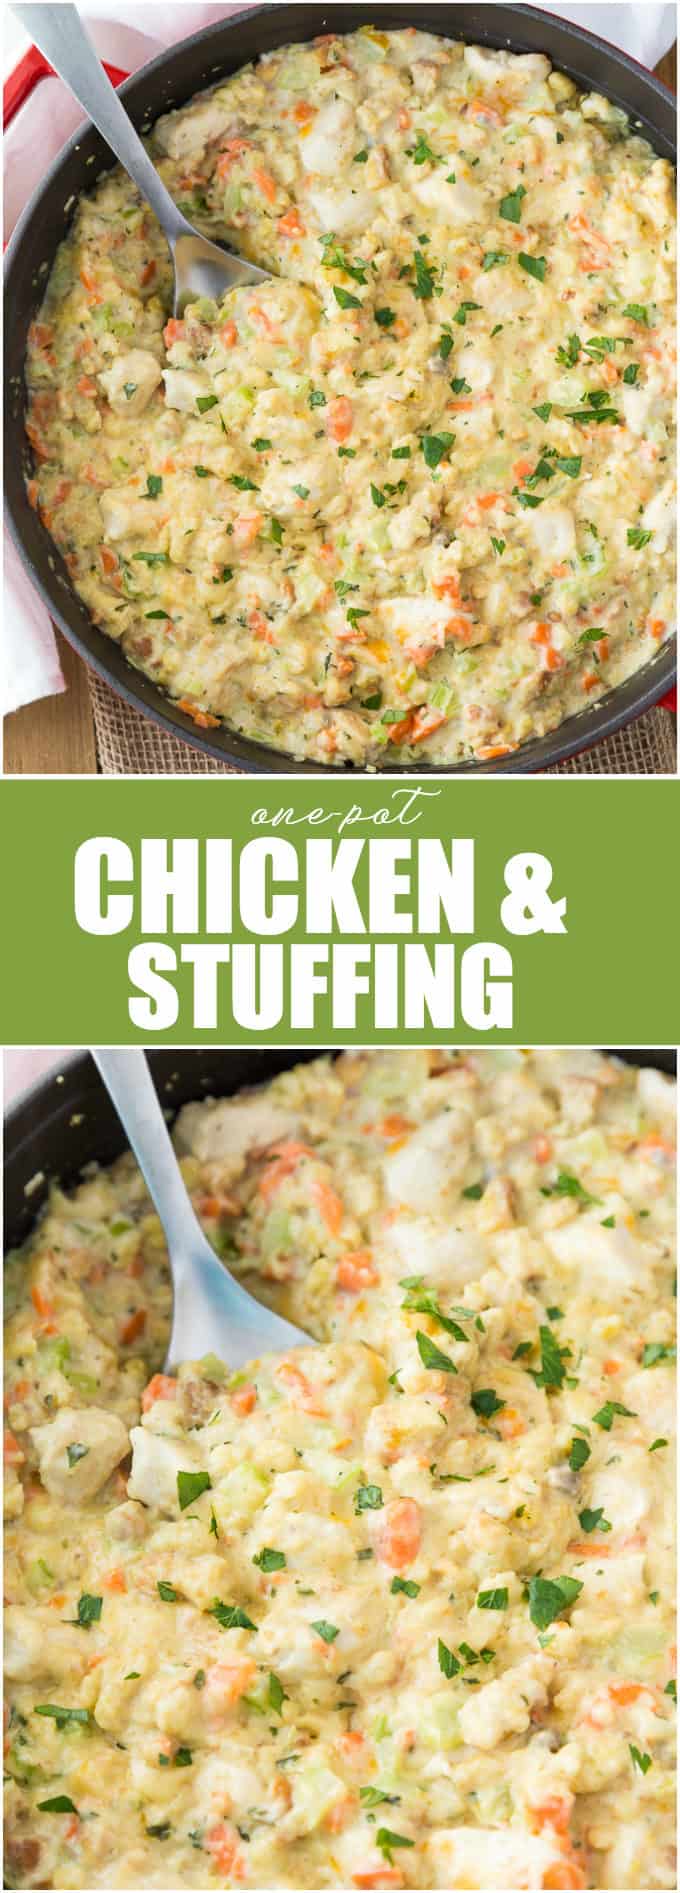 One-Pot Chicken & Stuffing - You don't need multiple pots for this savory, flavorful dinner! This easy comfort food recipe is a hit with kids and adults alike.